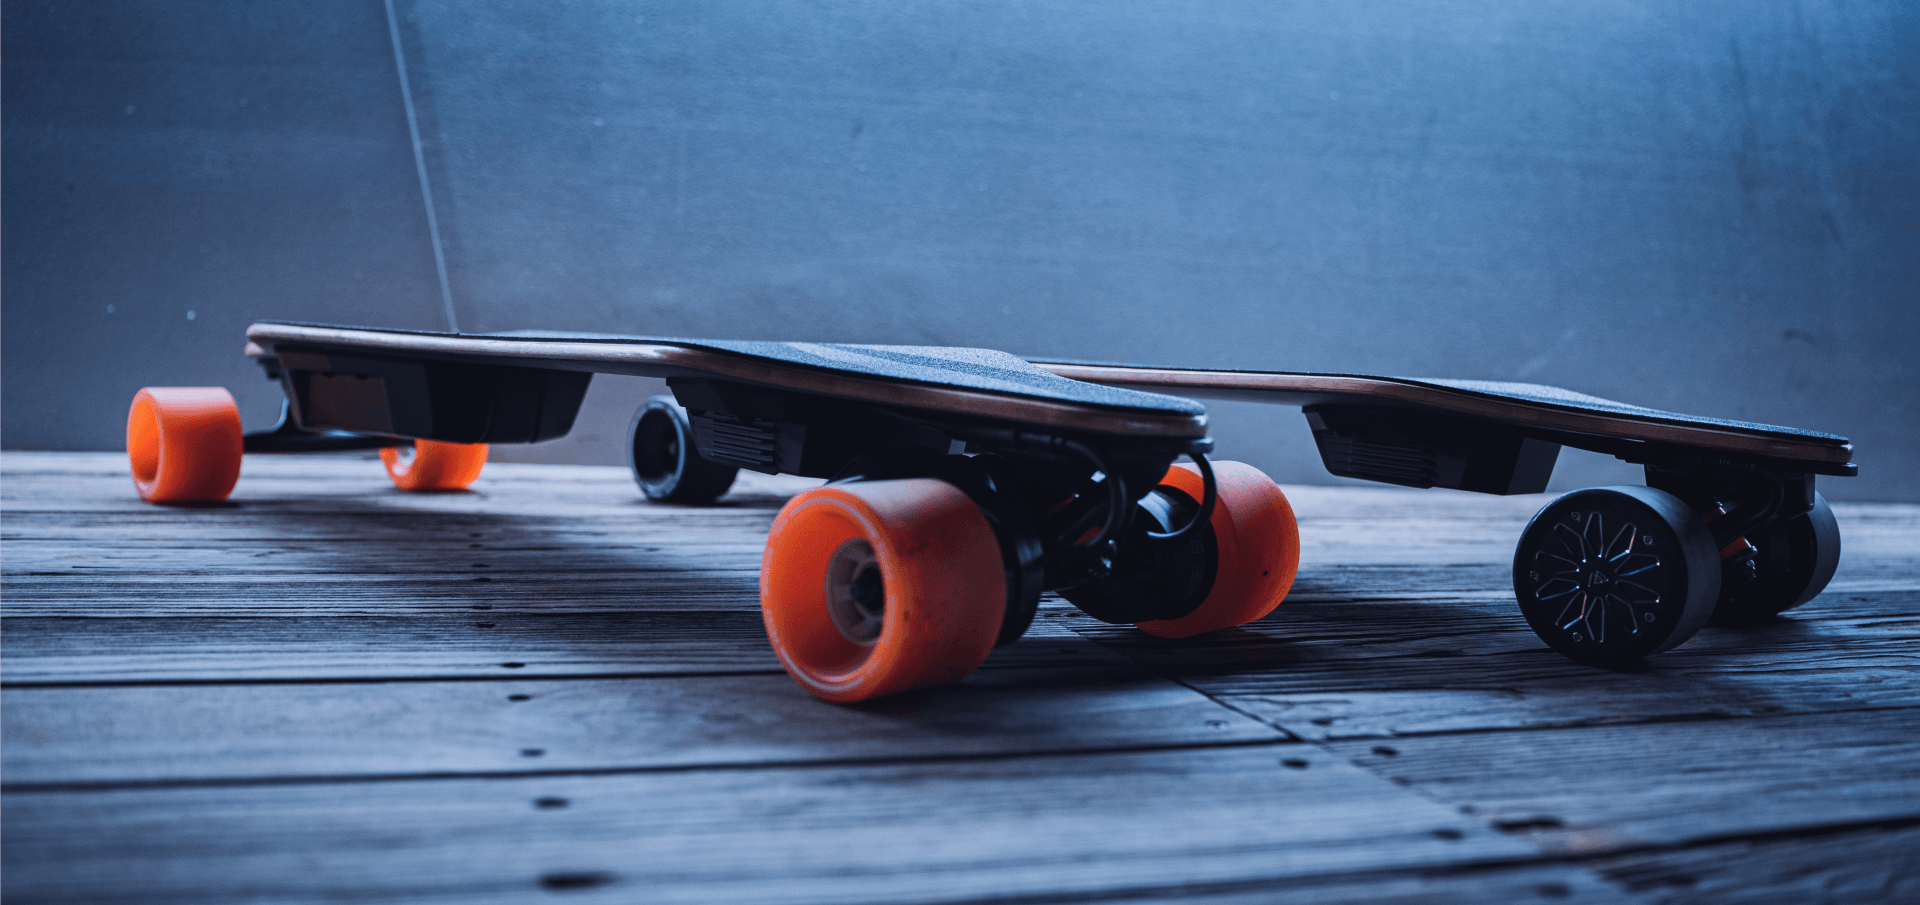 Introducing Wowgo Pioneer 4 and Pioneer X4 - WOWGO BOARD